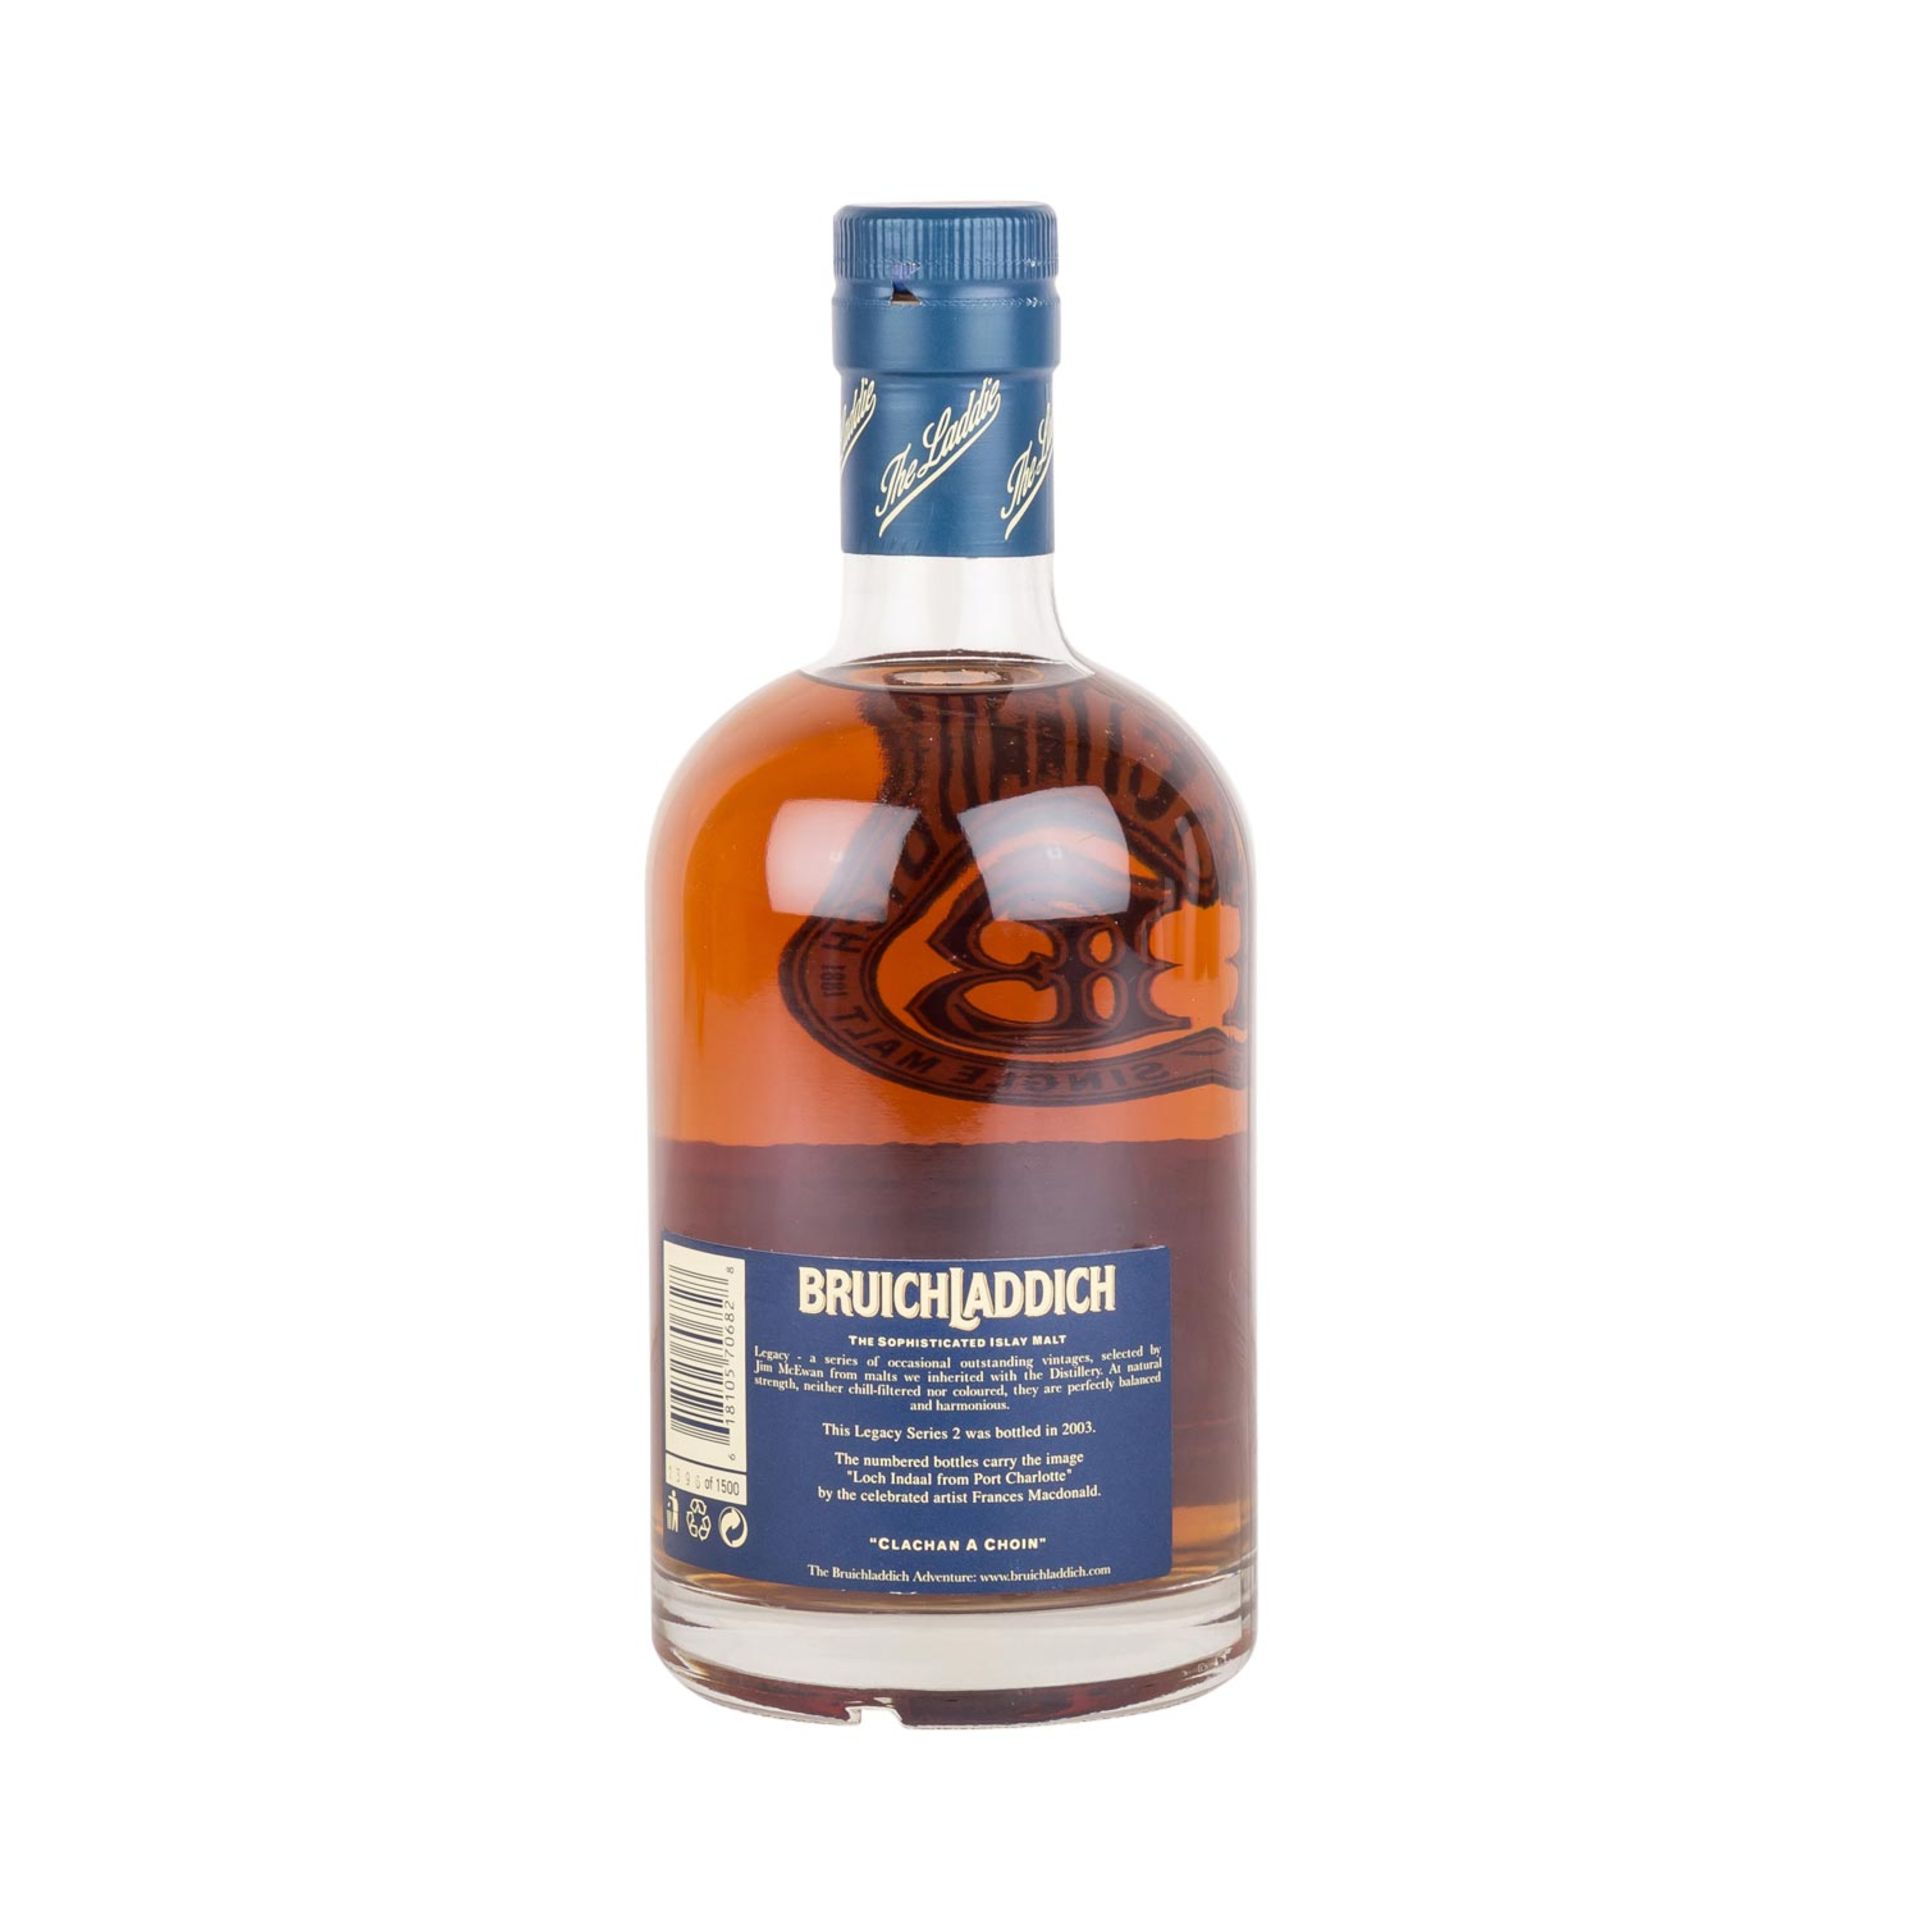 BRUICHLADDICH Single Malt Scotch Whisky 'Legacy Serie Two' 37 Years - Image 3 of 5